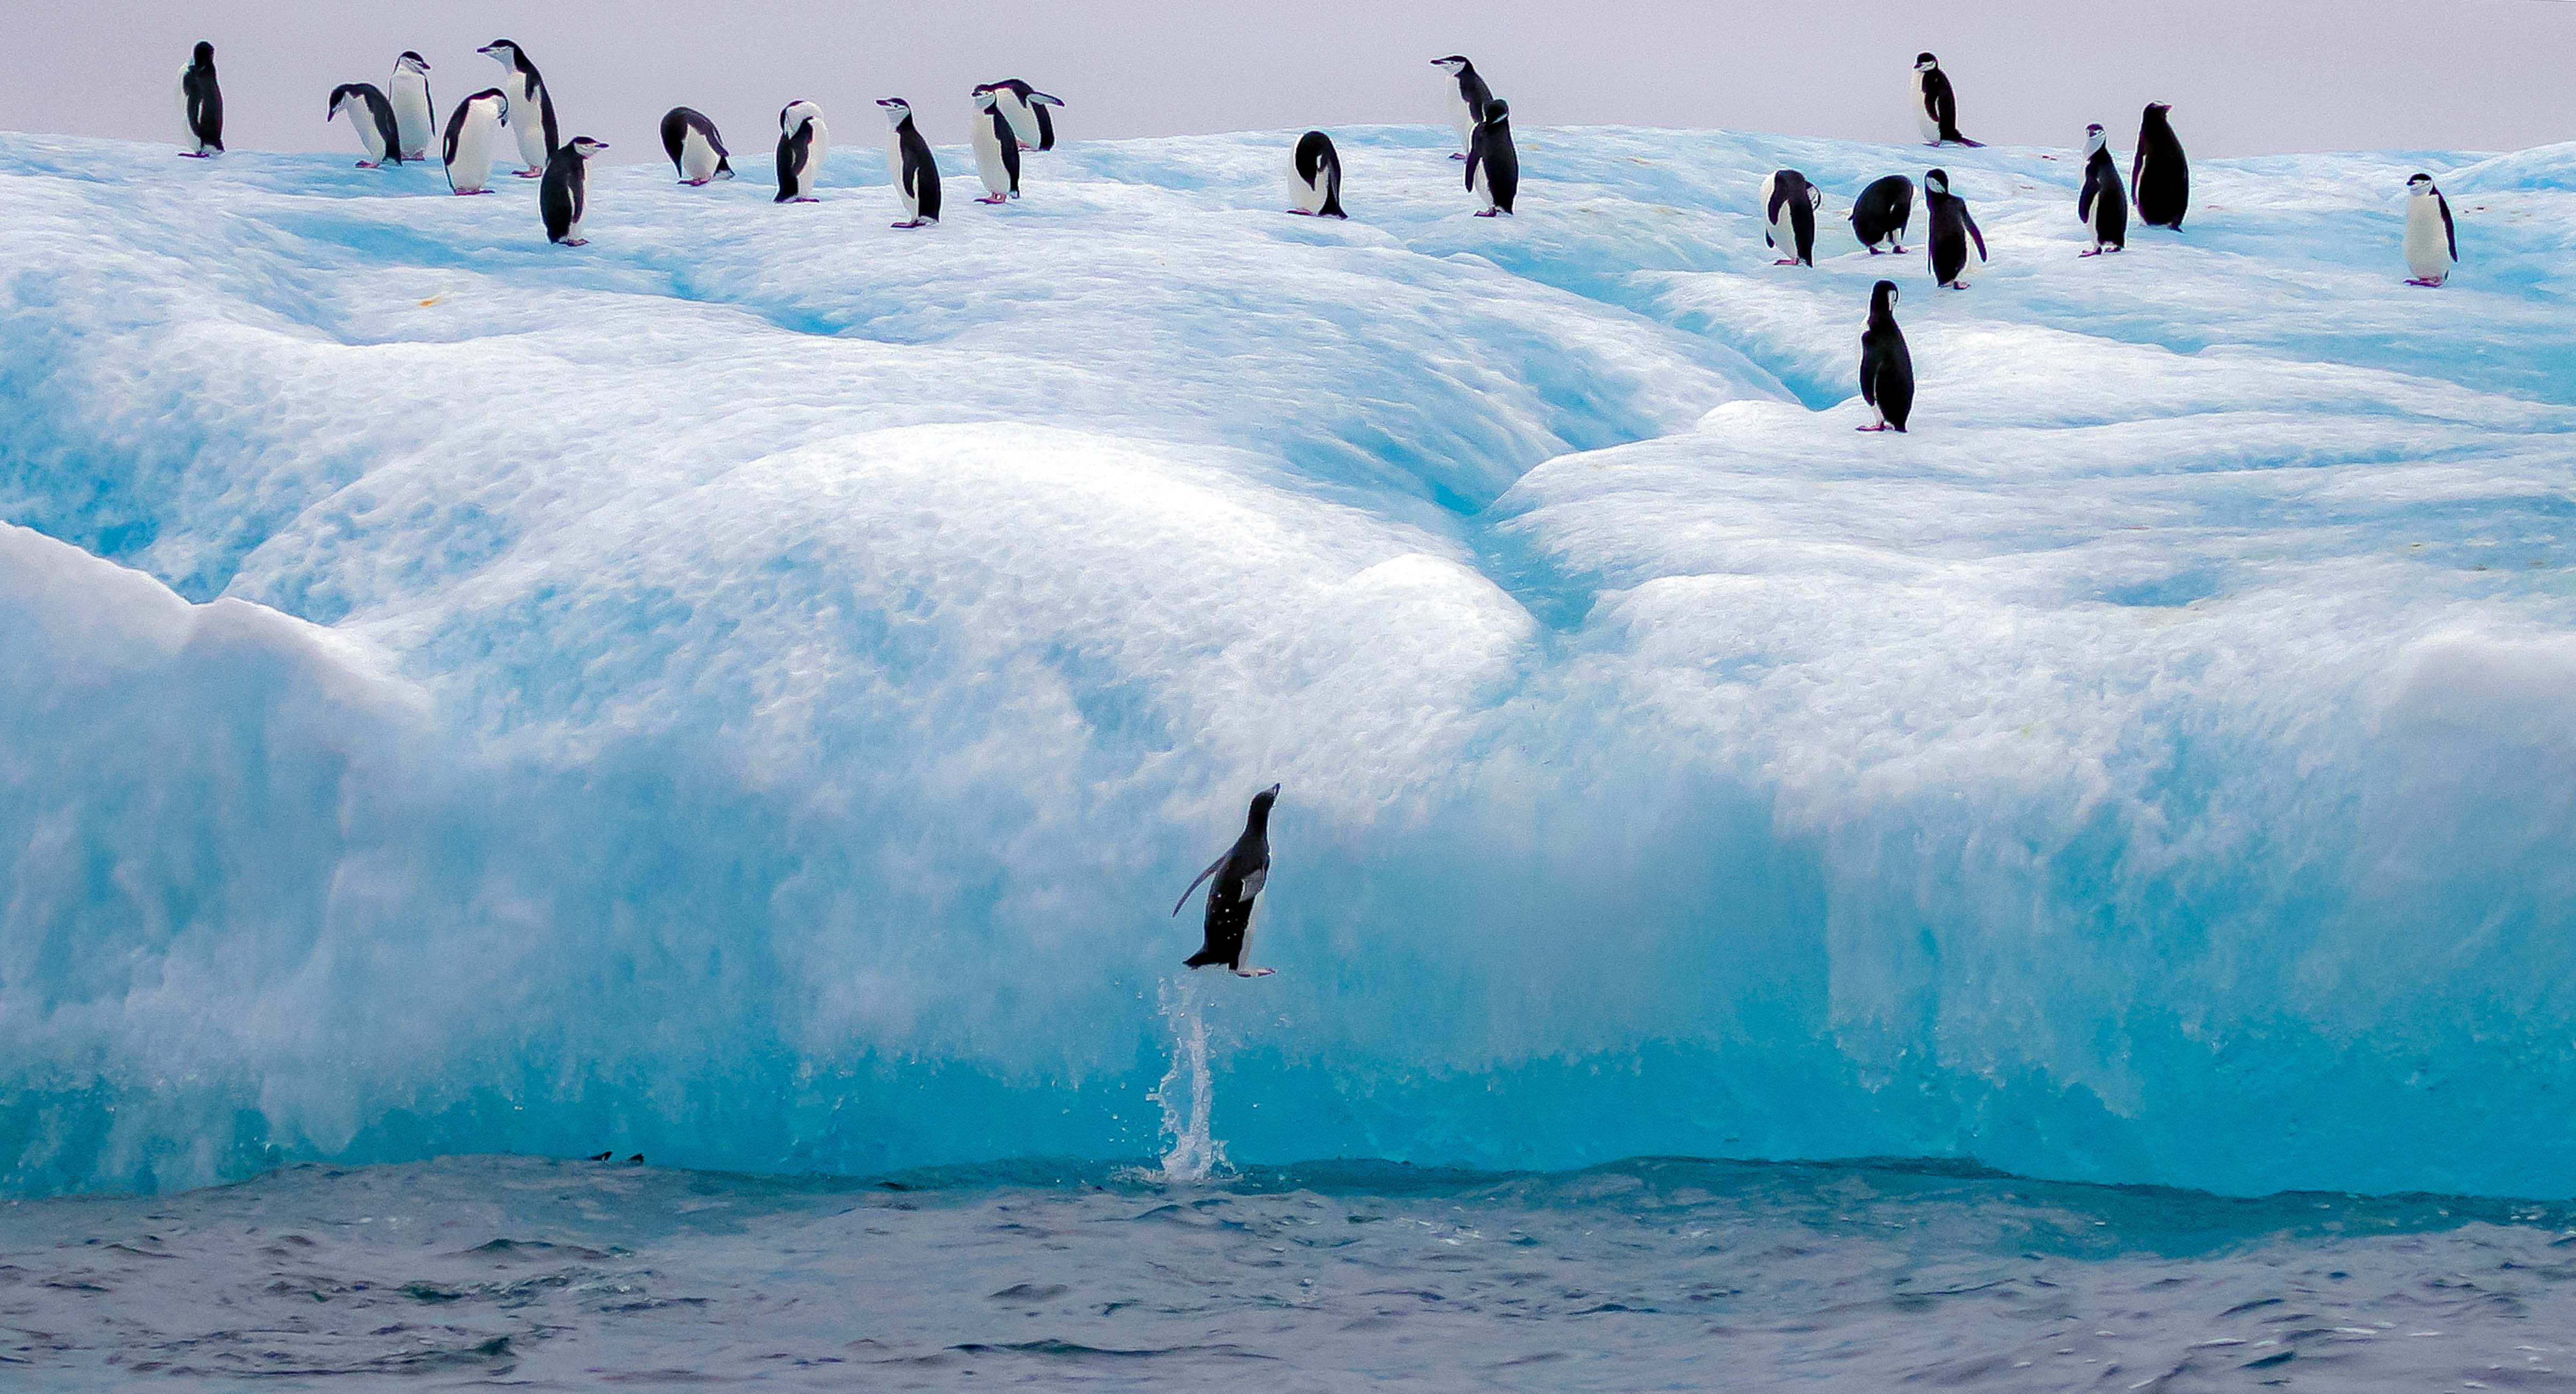 South Sandwich Islands, Saunders Island, Penguin Leaping On To Iceberg, 2006